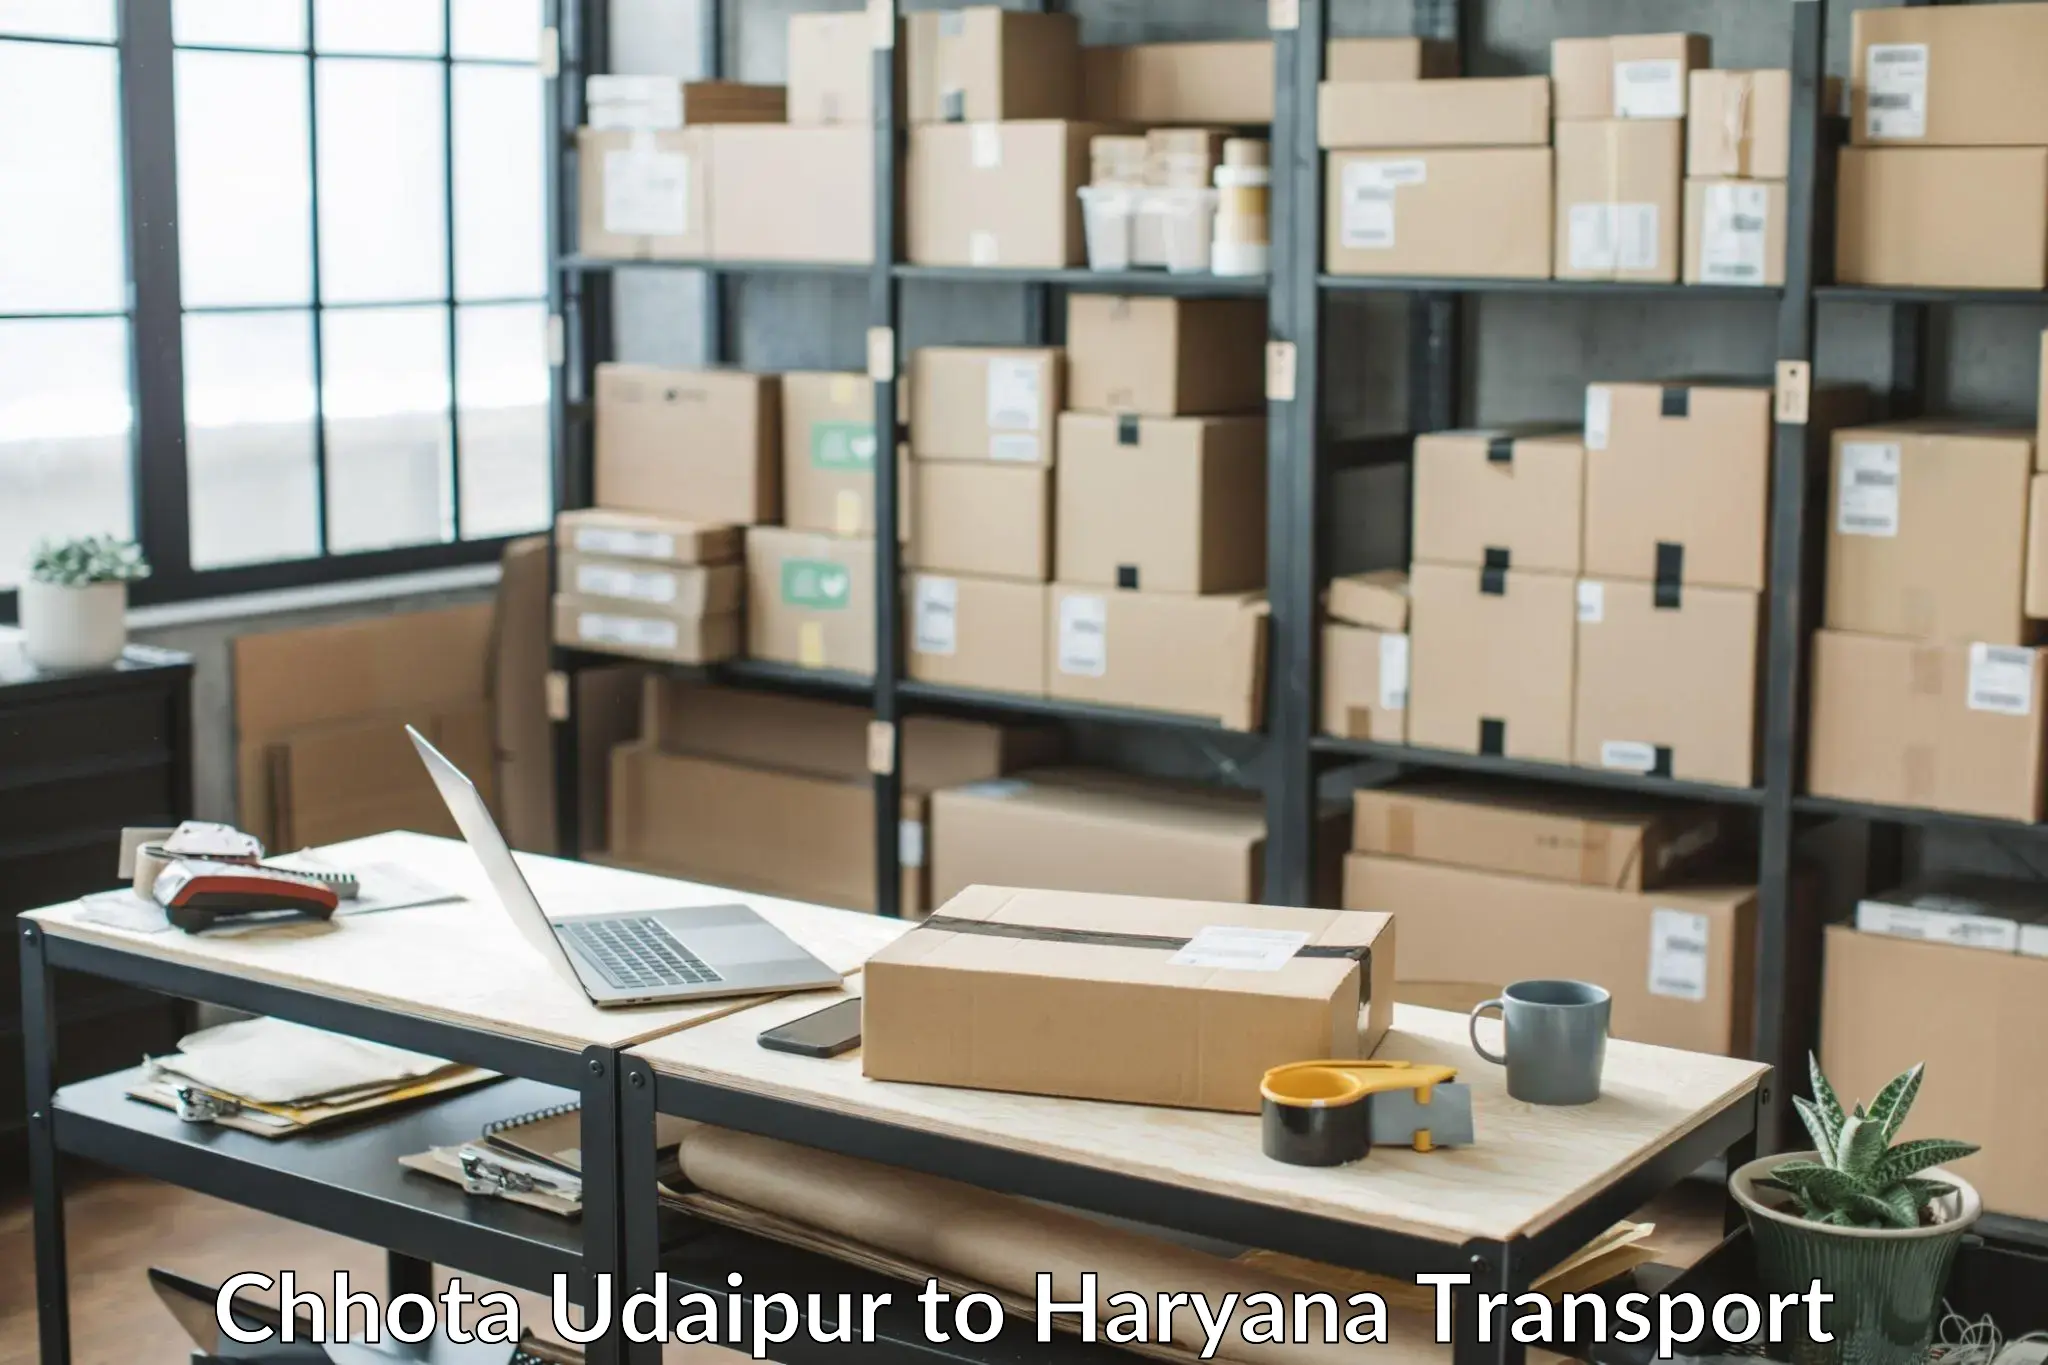 Online transport service Chhota Udaipur to Fatehabad